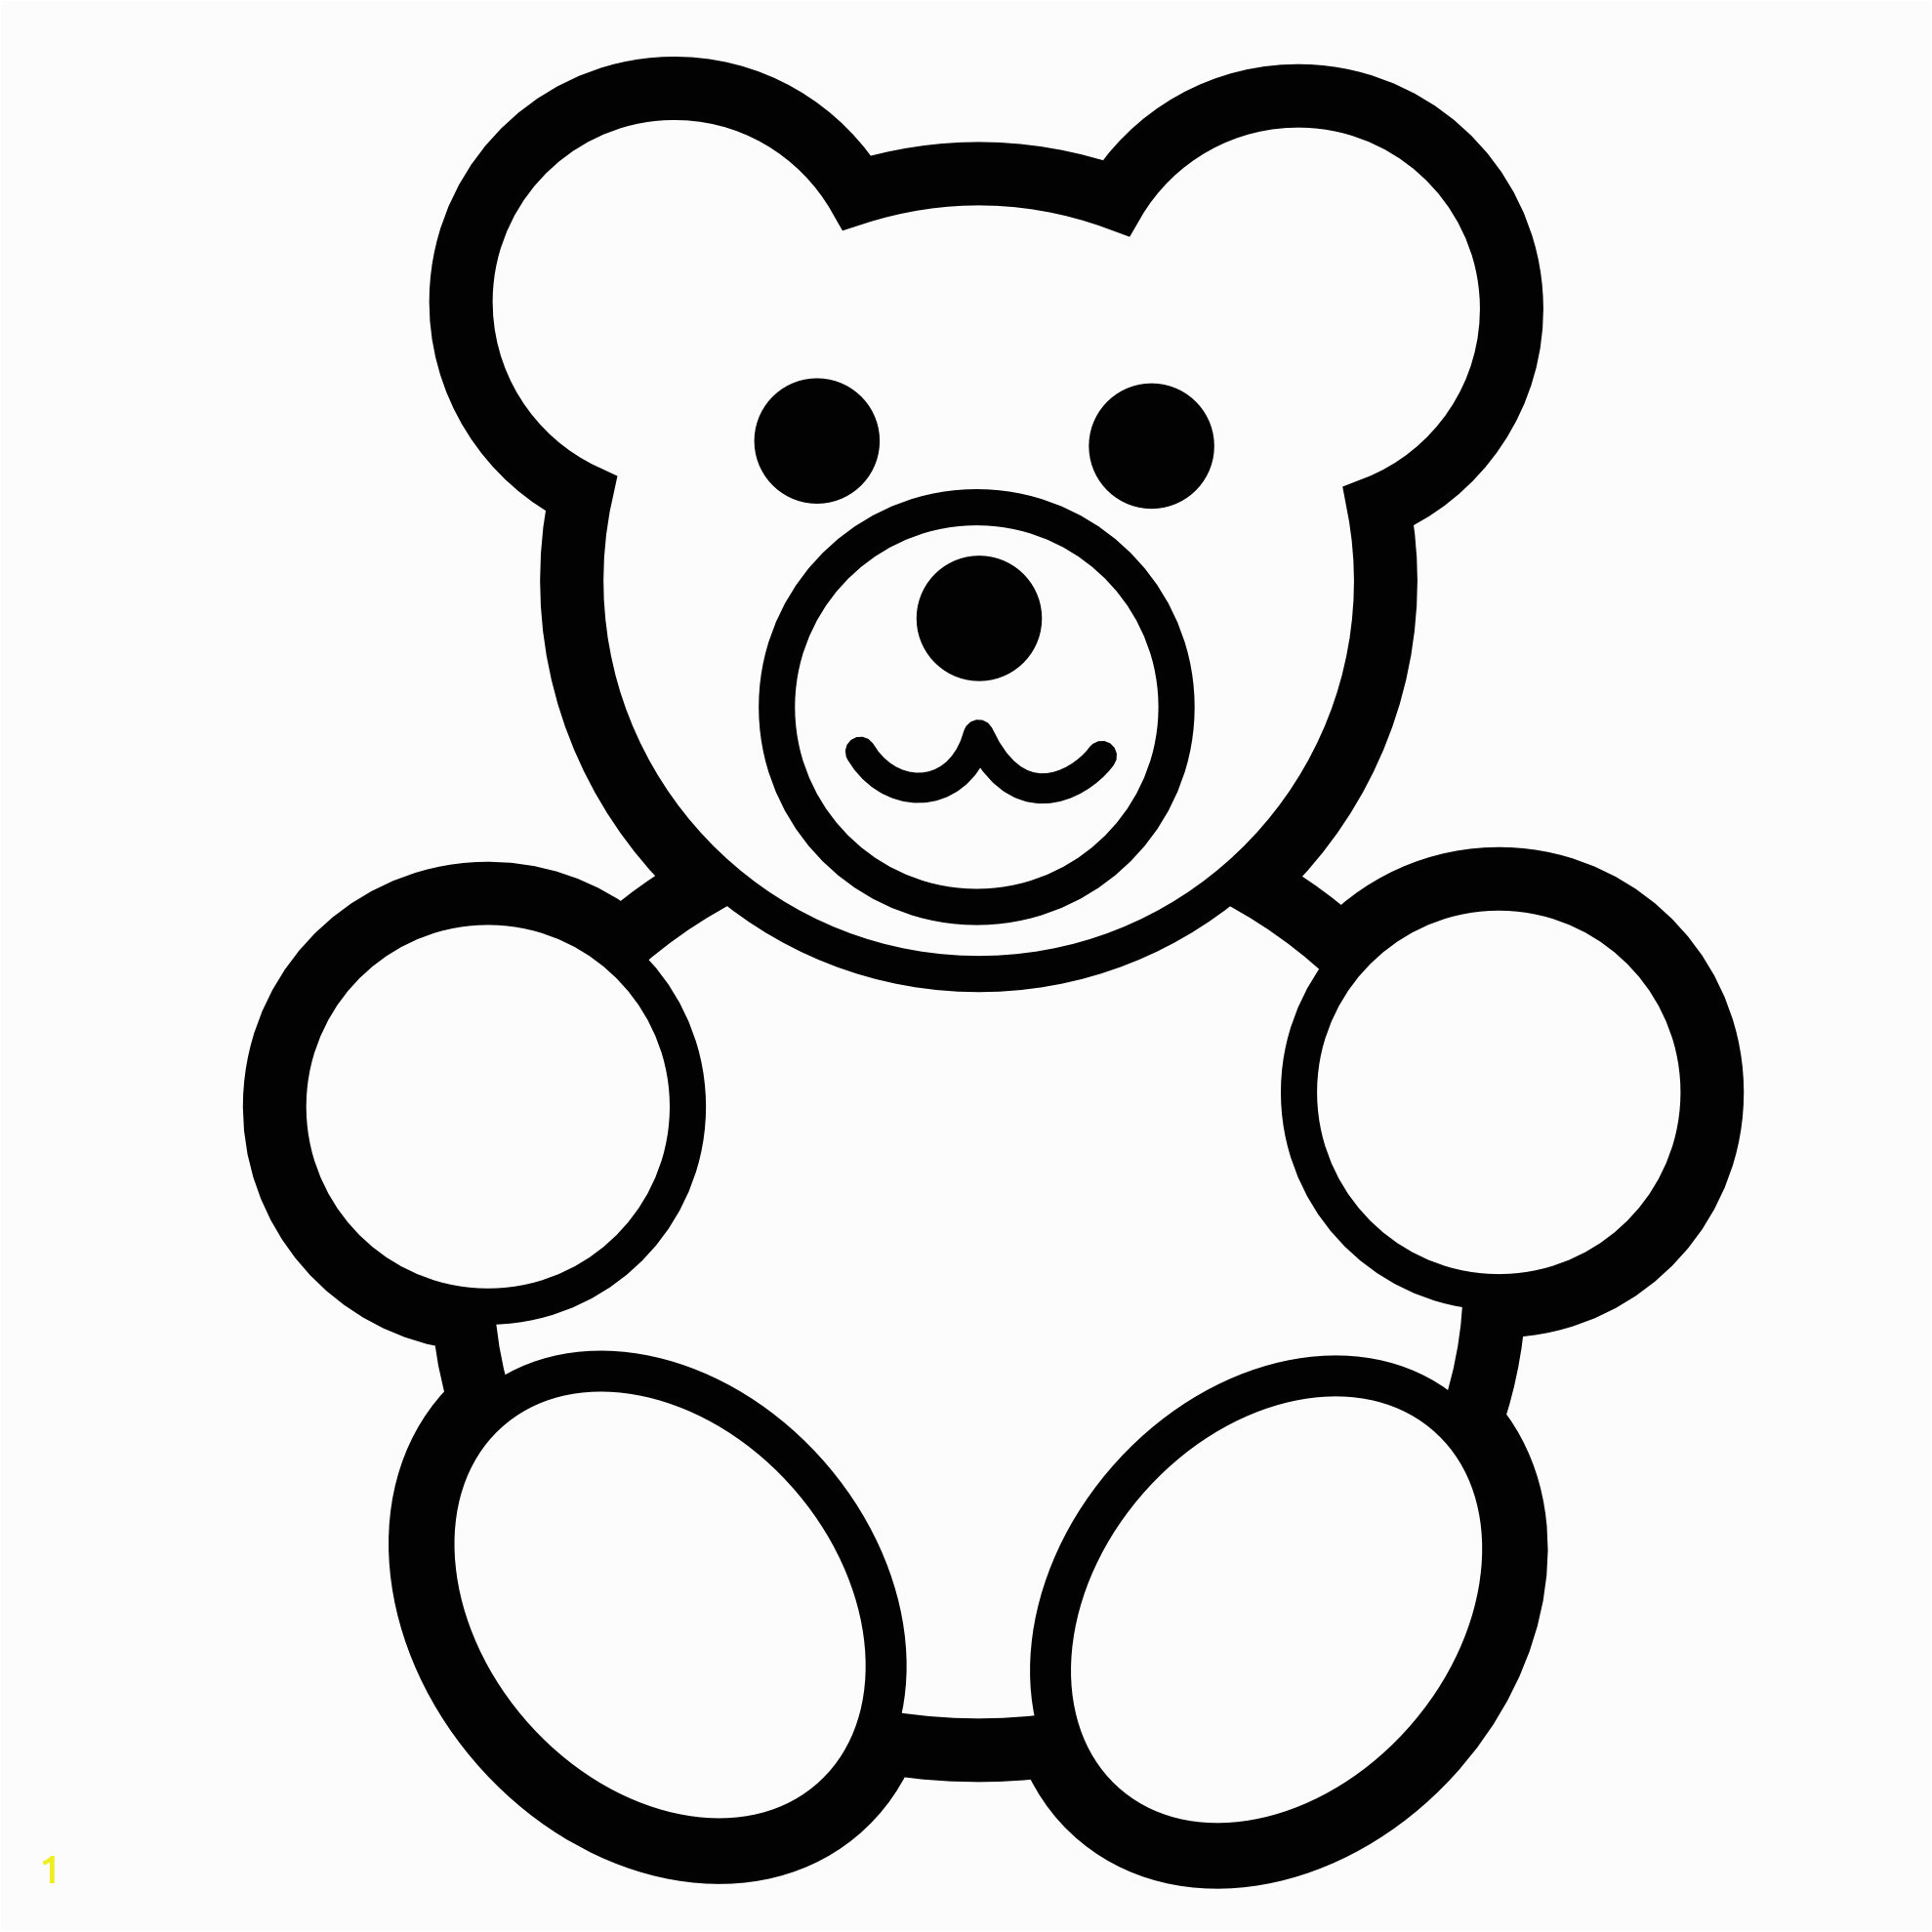 Teddy Bear Coloring Pages Free Printable Free Printable Teddy Bear Coloring Pages for Kids